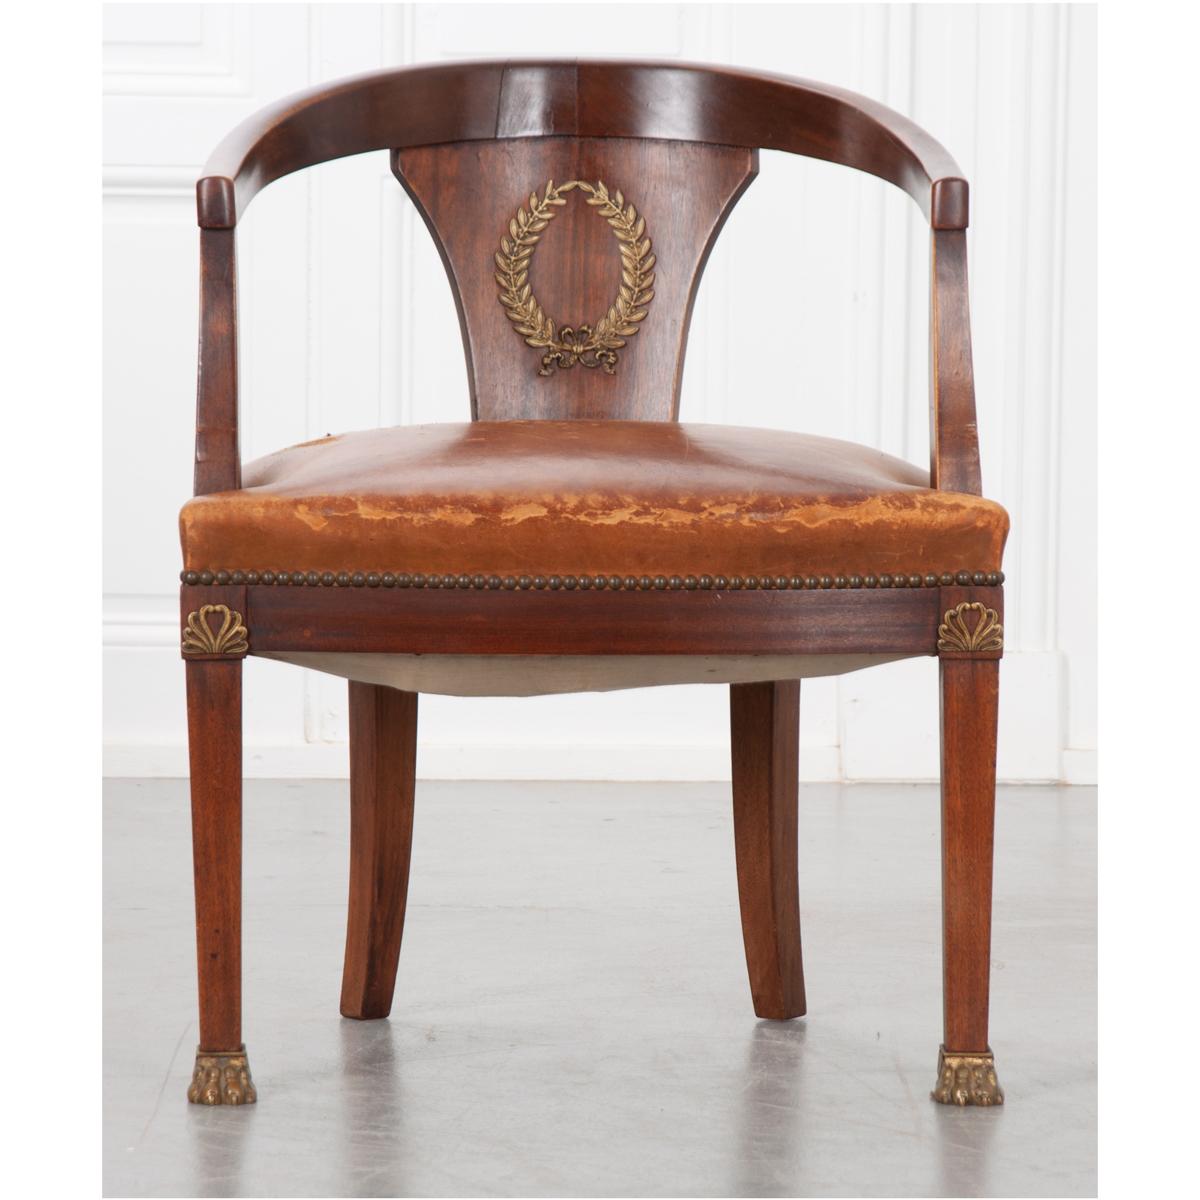 A handsome Empire barrel back chair. This mahogany chair has a brown/tan antique leather upholstered cushion trimmed with a nailhead border. The concave back has a shaped backrest with a large ormolu laurel wreath at its center. The back extends